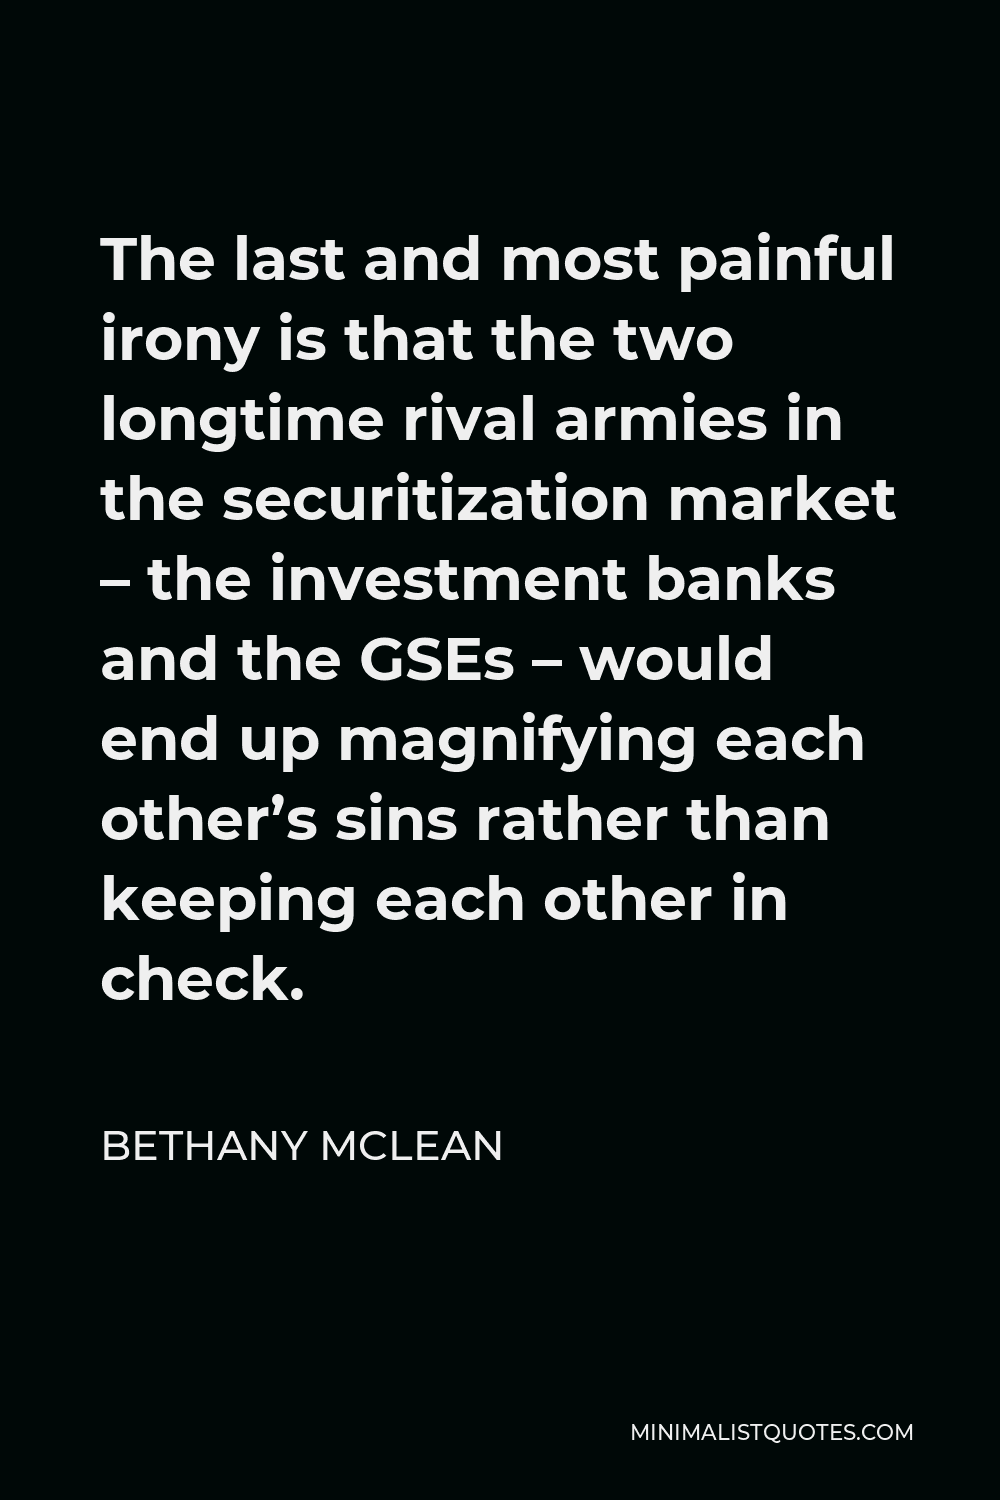 Bethany McLean Quote - The last and most painful irony is that the two longtime rival armies in the securitization market – the investment banks and the GSEs – would end up magnifying each other’s sins rather than keeping each other in check.